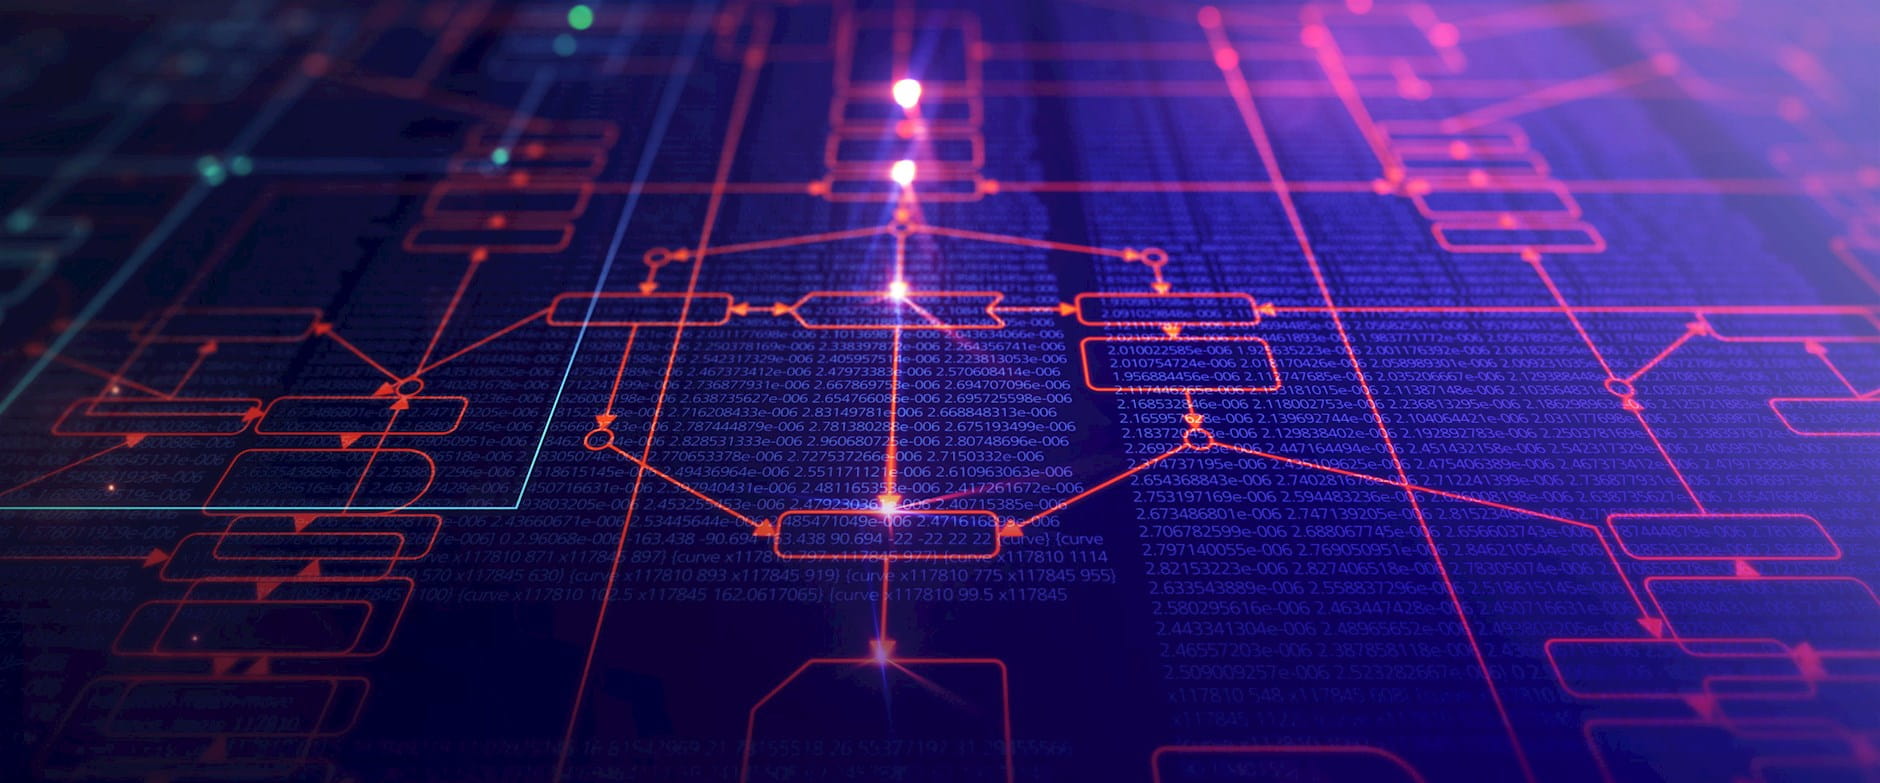 Stylized illustration of a technological circuit board-like decision tree